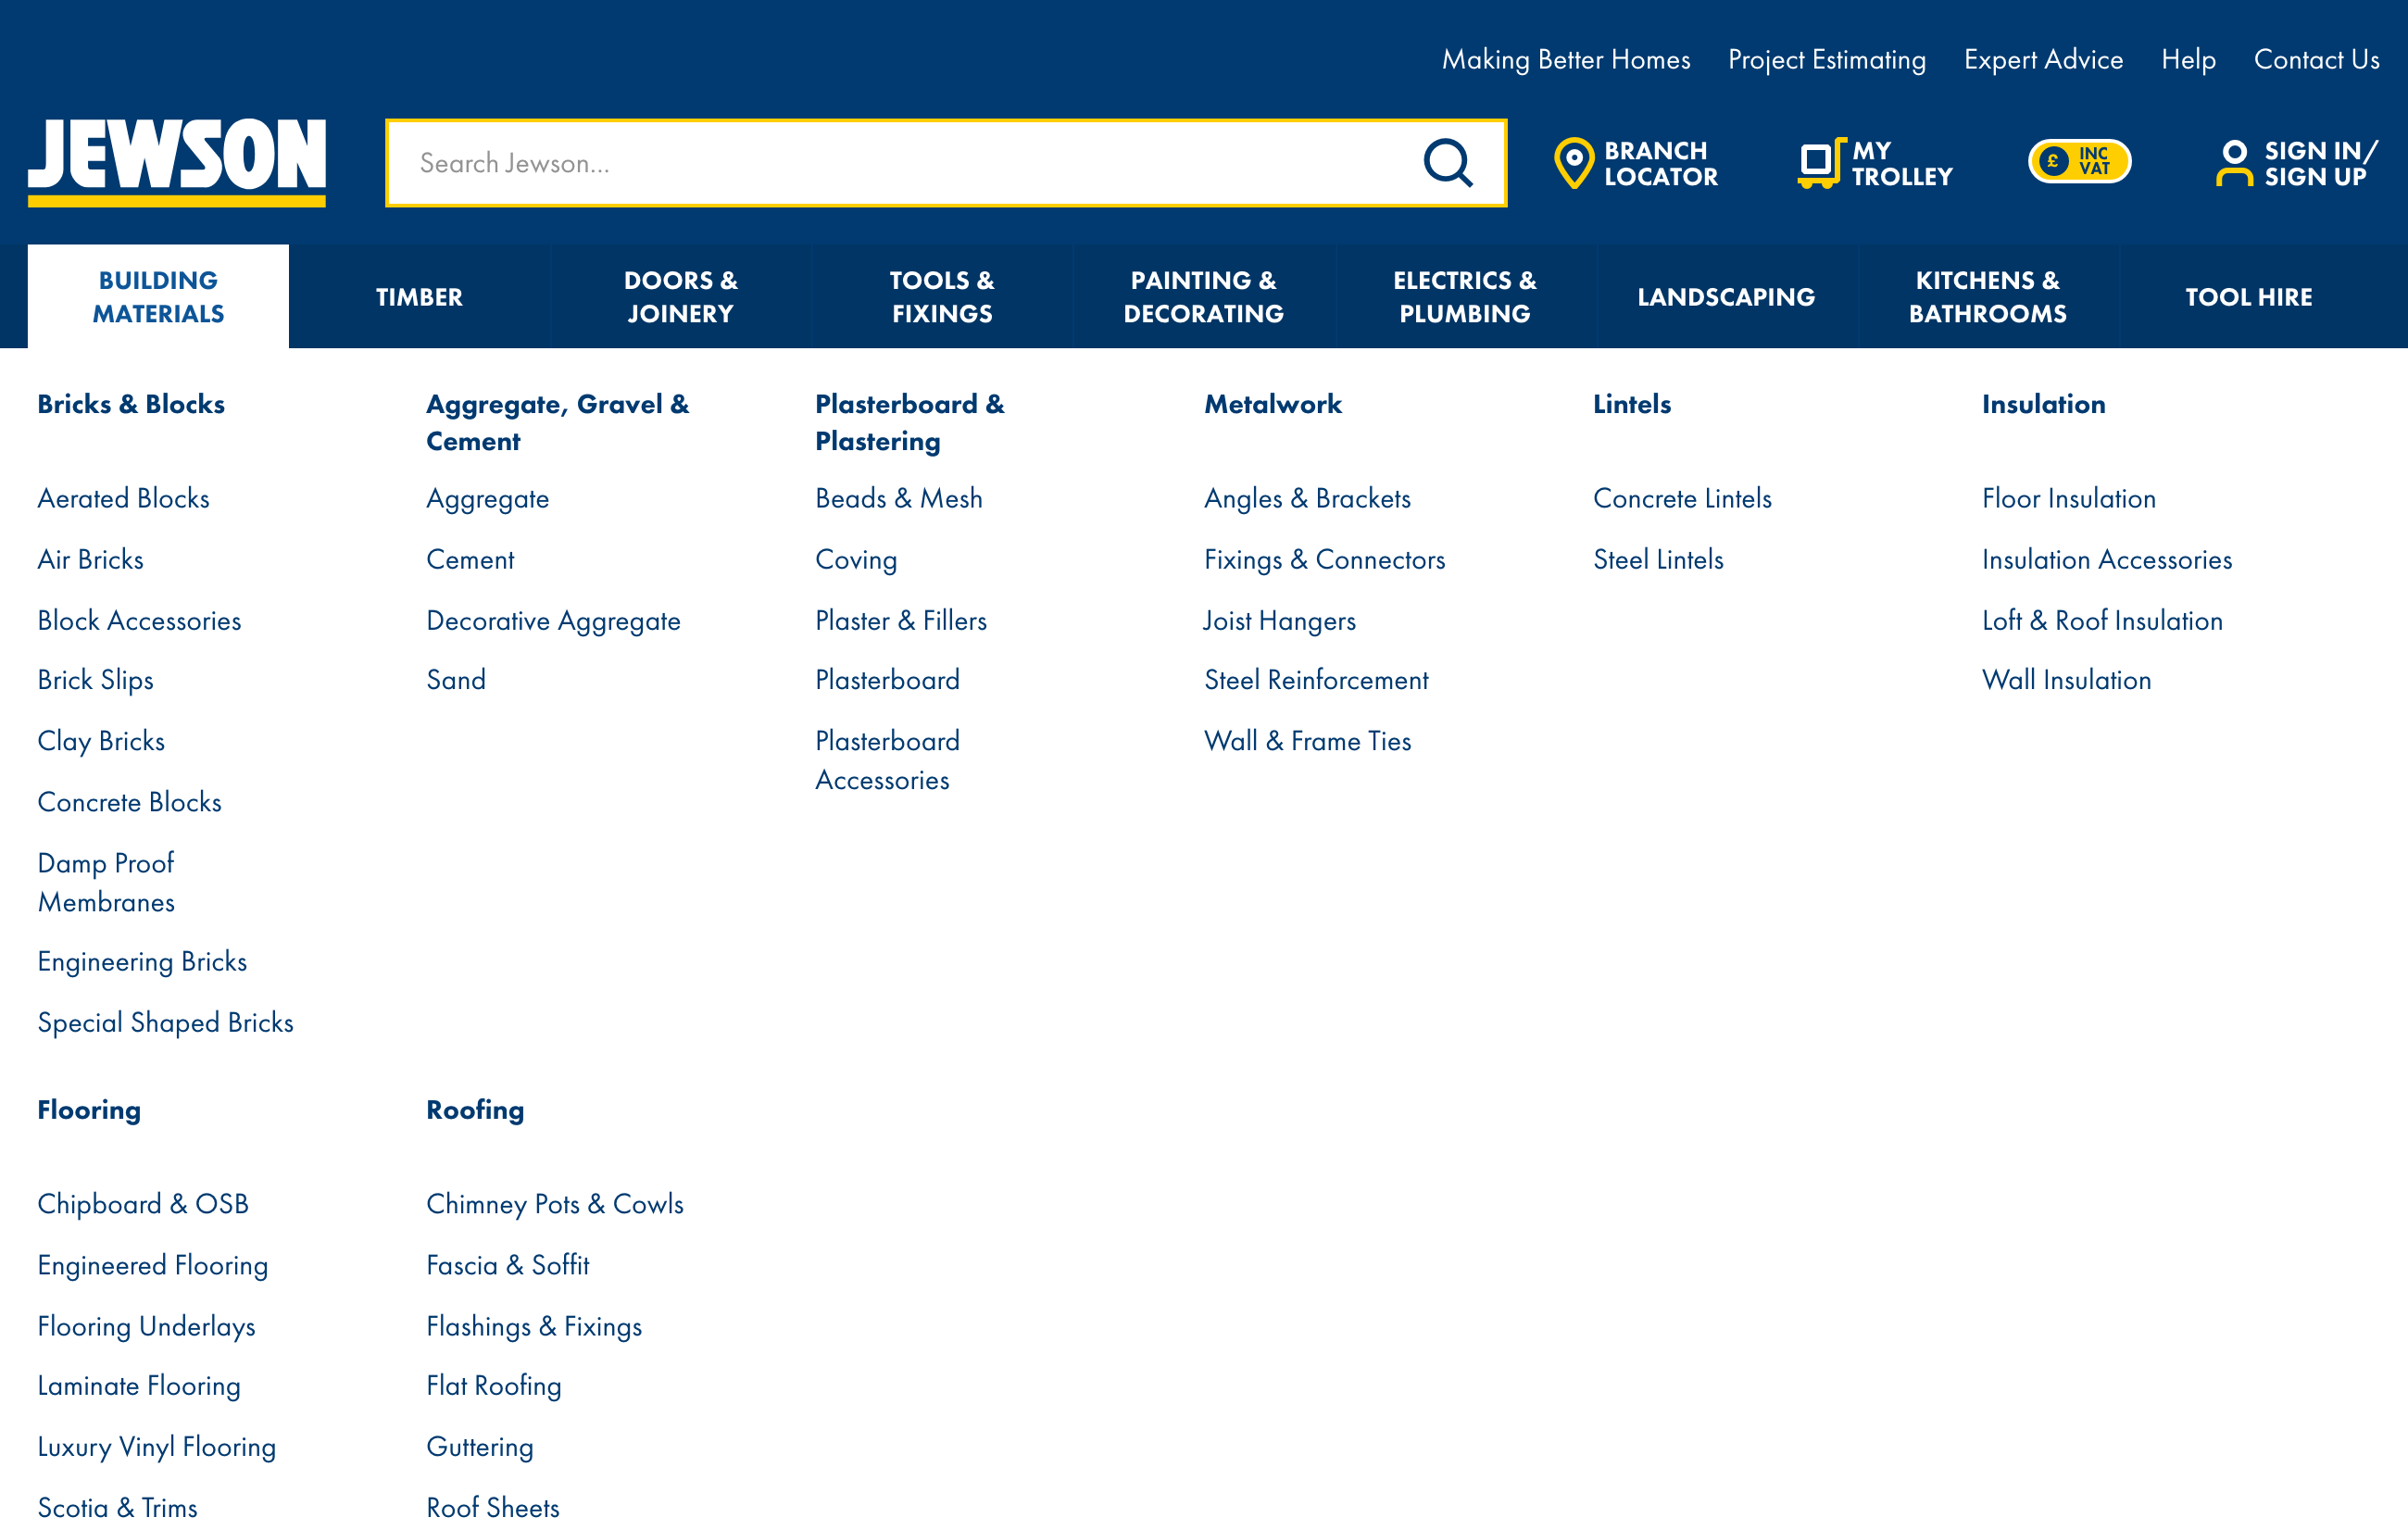 You can do the same with all other categories as well. Thinning out the menu – as seen here on jewson.co.uk – not only ensures a better distribution of links, but also makes menus clearer for users: